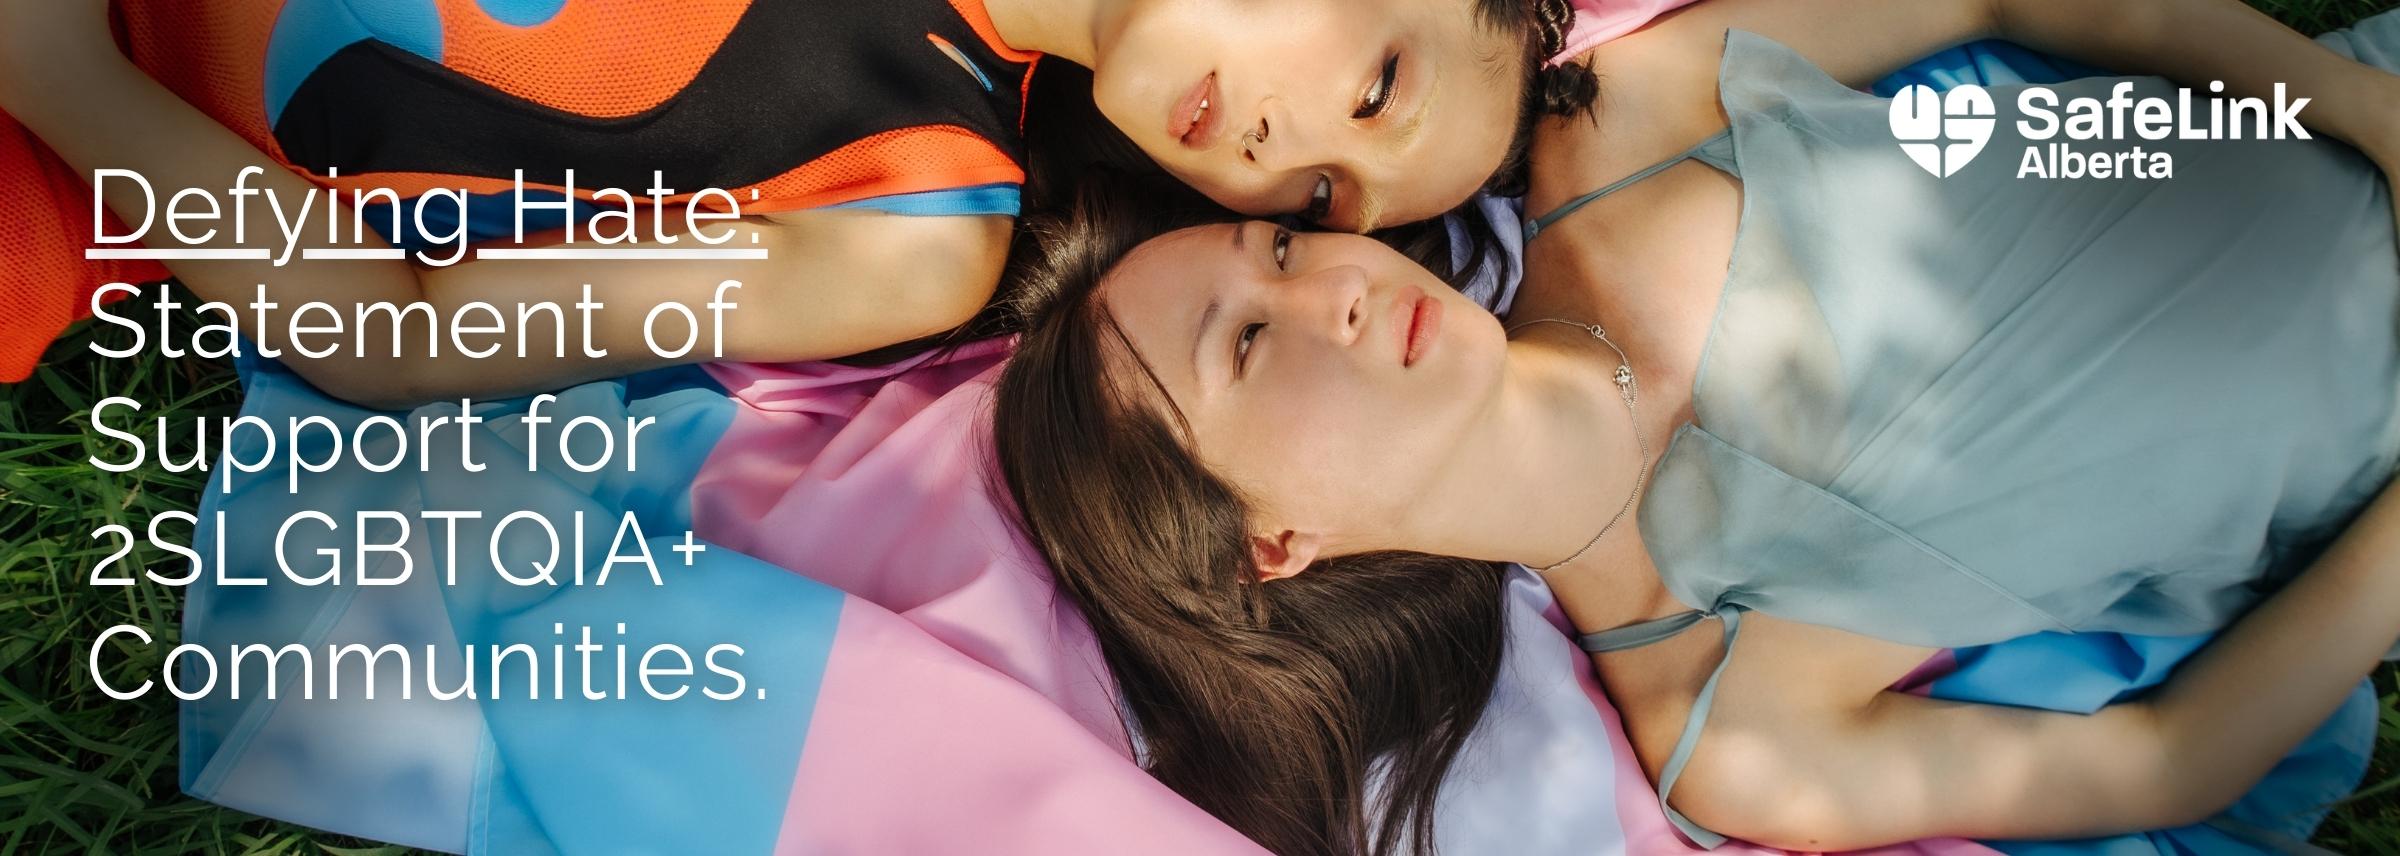 Text Reads "Defying Hate: Statement of Support for 2SLGBTQIA+ Communities" Image shows two trans people laying on a trans flag in the grass, dappled with sunlight.